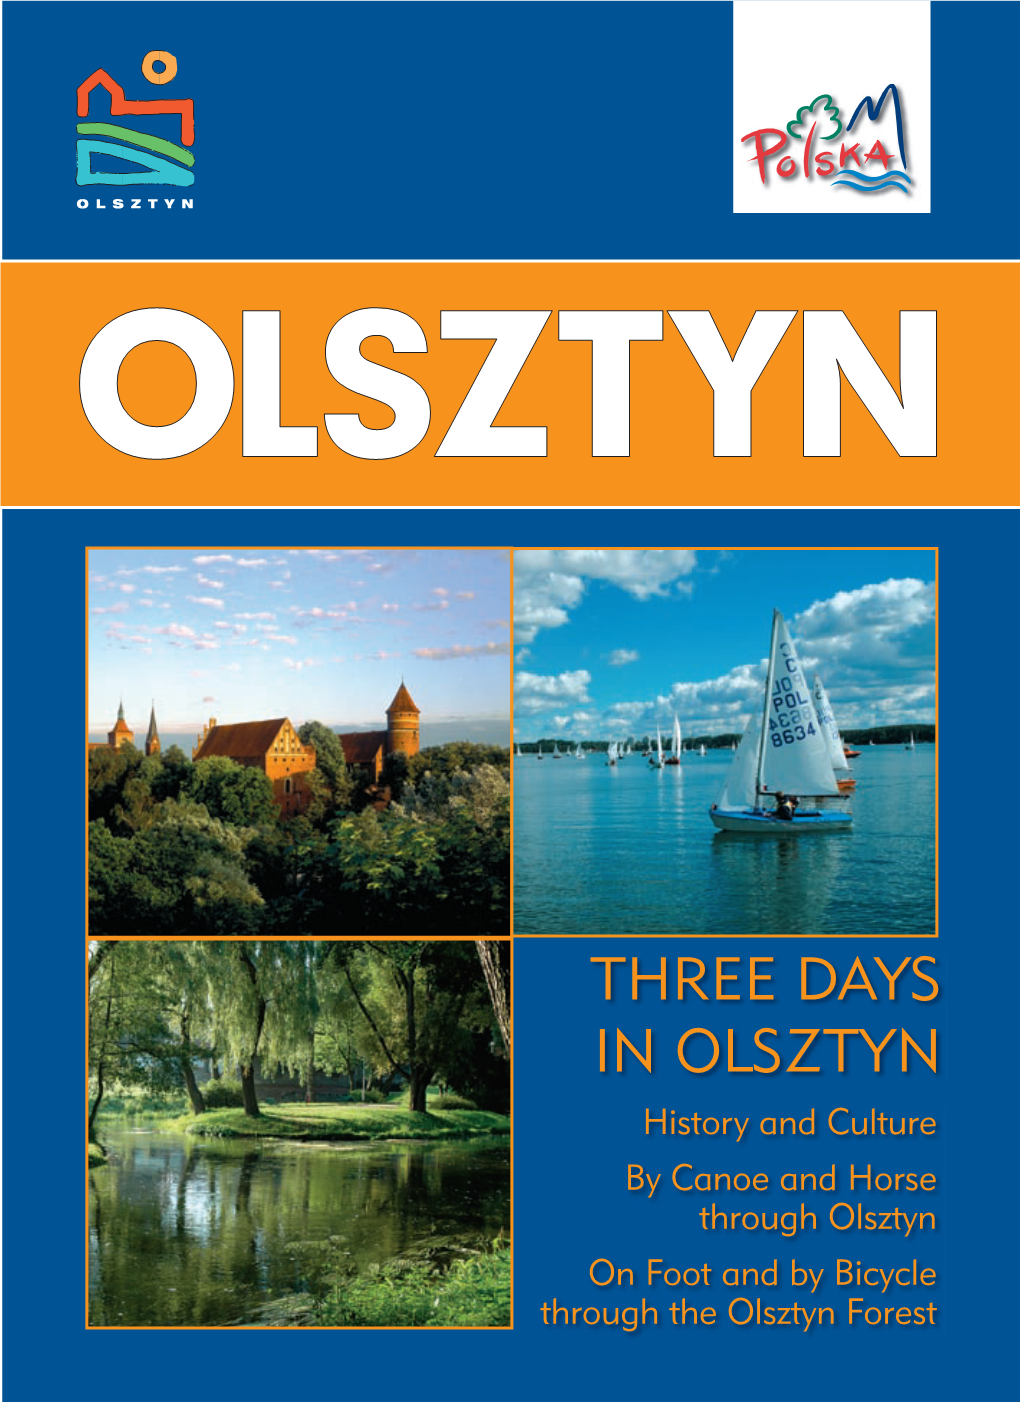 THREE DAYS in OLSZTYN History and Culture by Canoe and Horse Through Olsztyn on Foot and by Bicycle Through the Olsztyn Forest the Statue of Nicolaus Copernicus